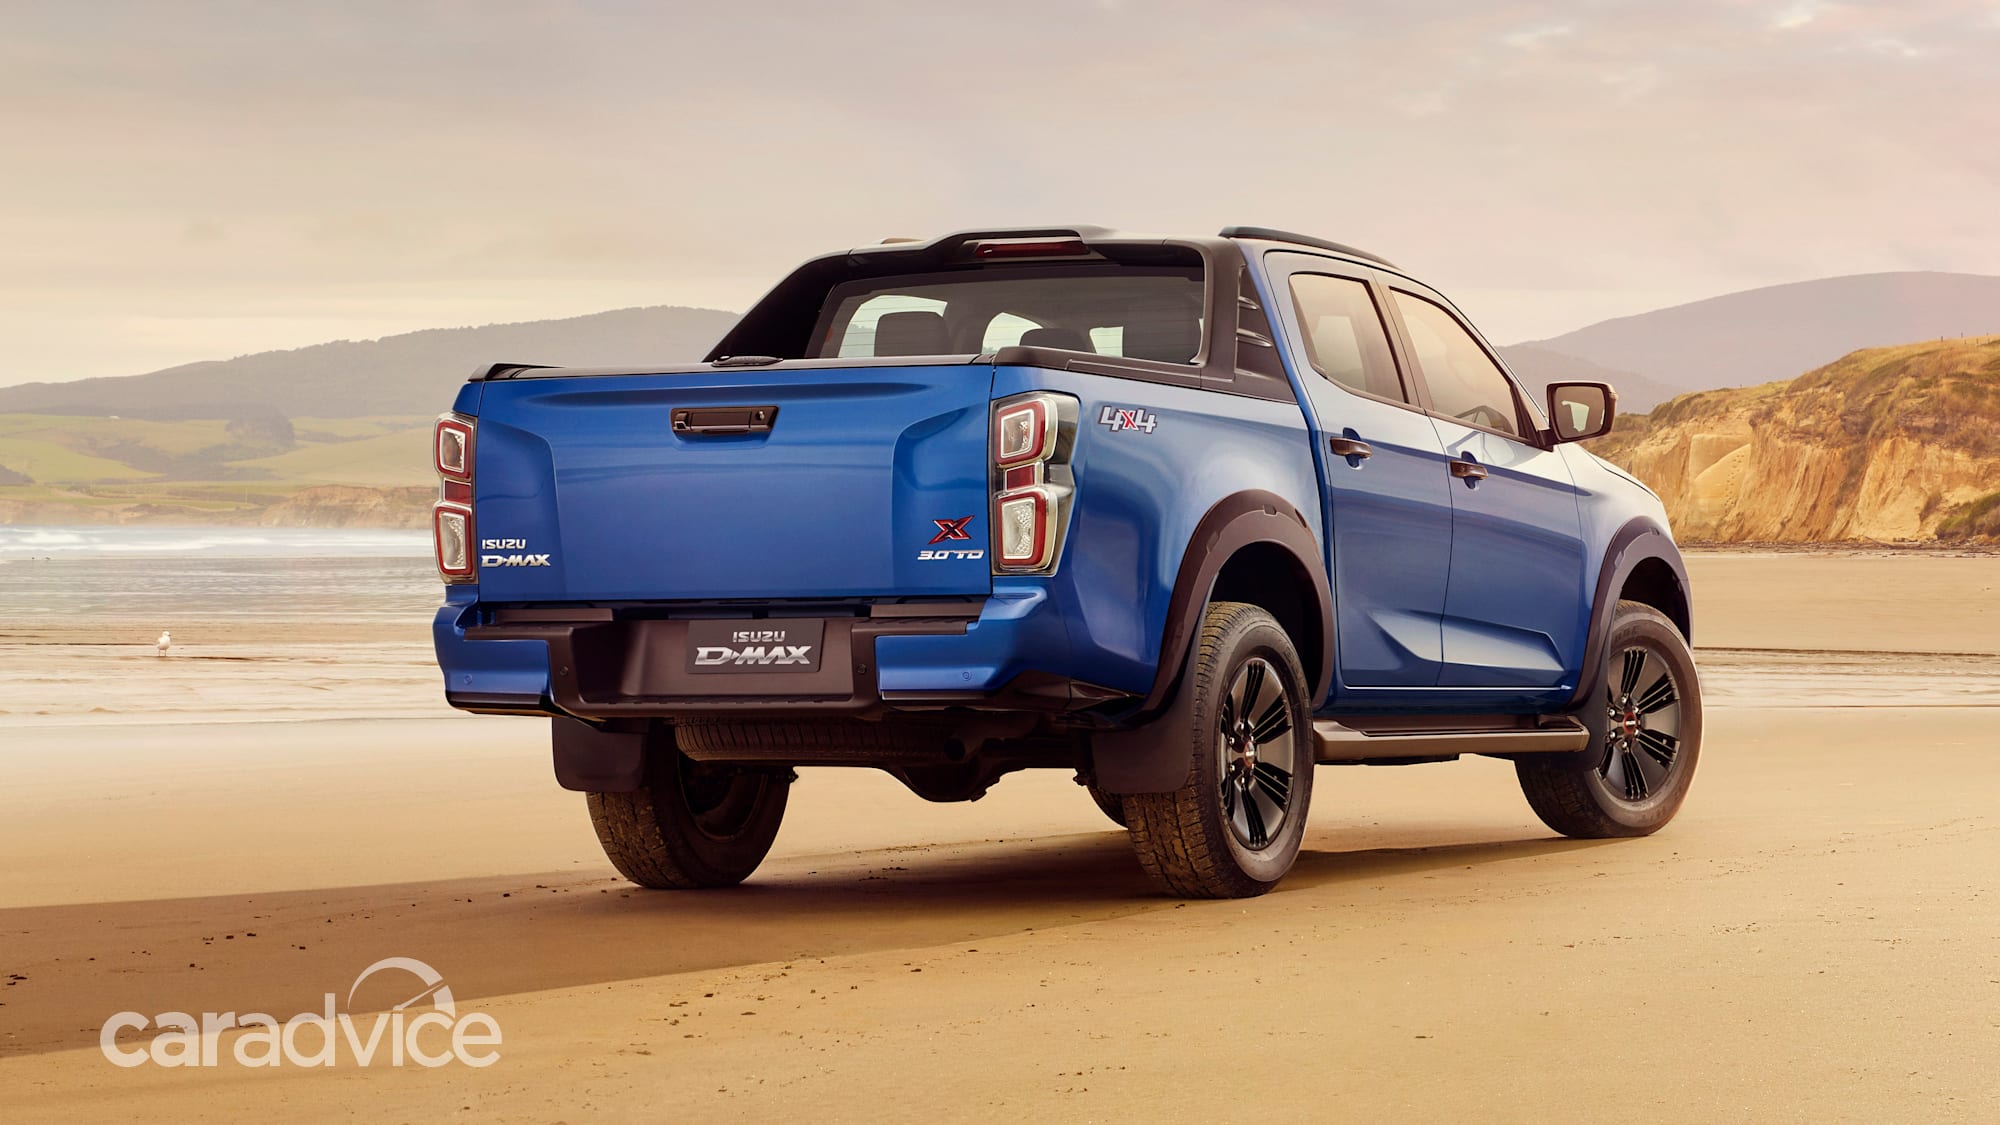 2021 isuzu dmax price and specs first new model in